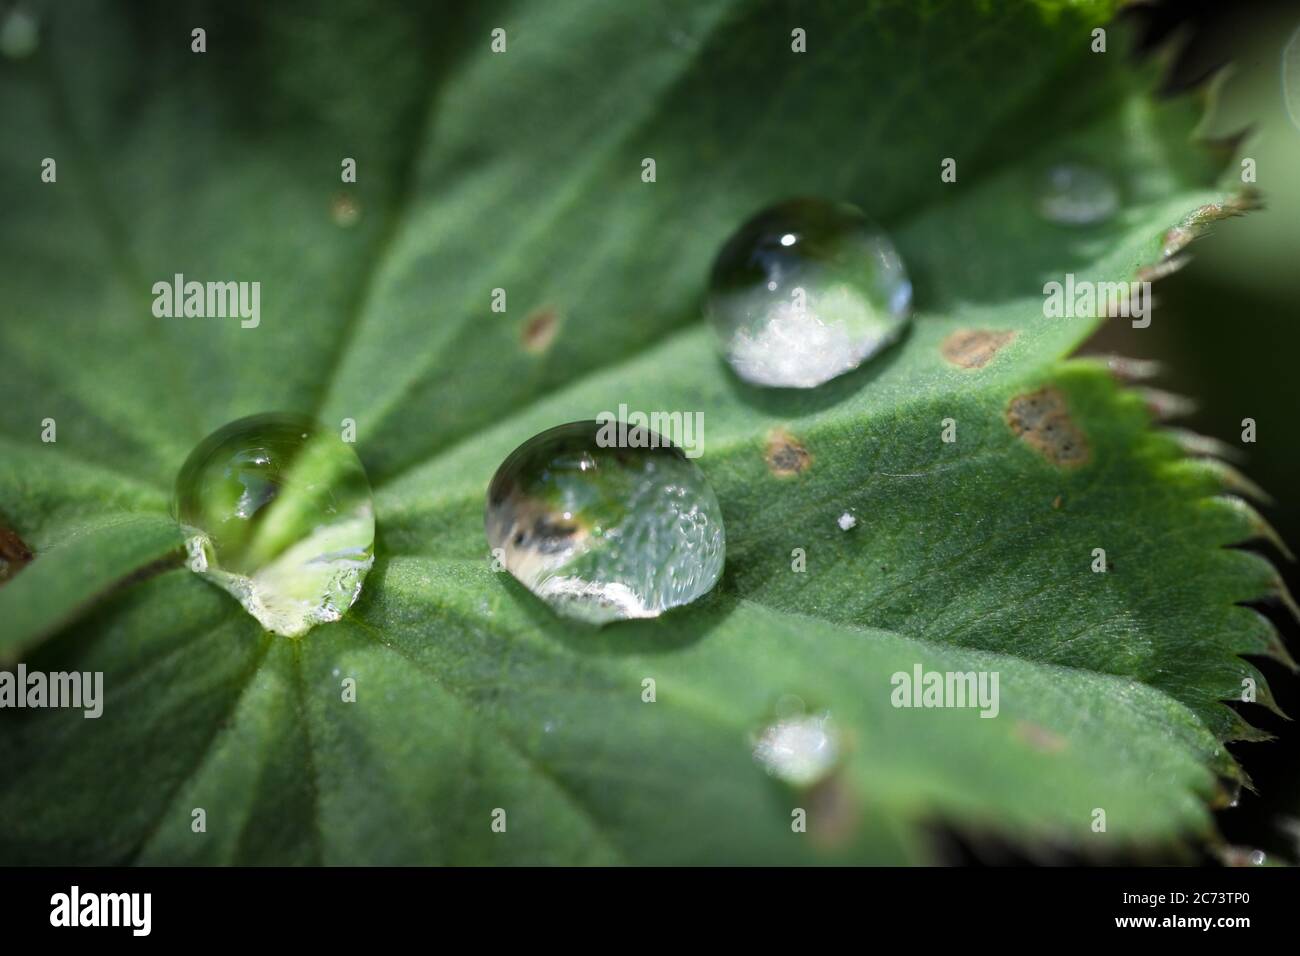 Water drops on the leafs of  a Lady's Mantle or Alchemilla mollis. Narrow depth of field Stock Photo